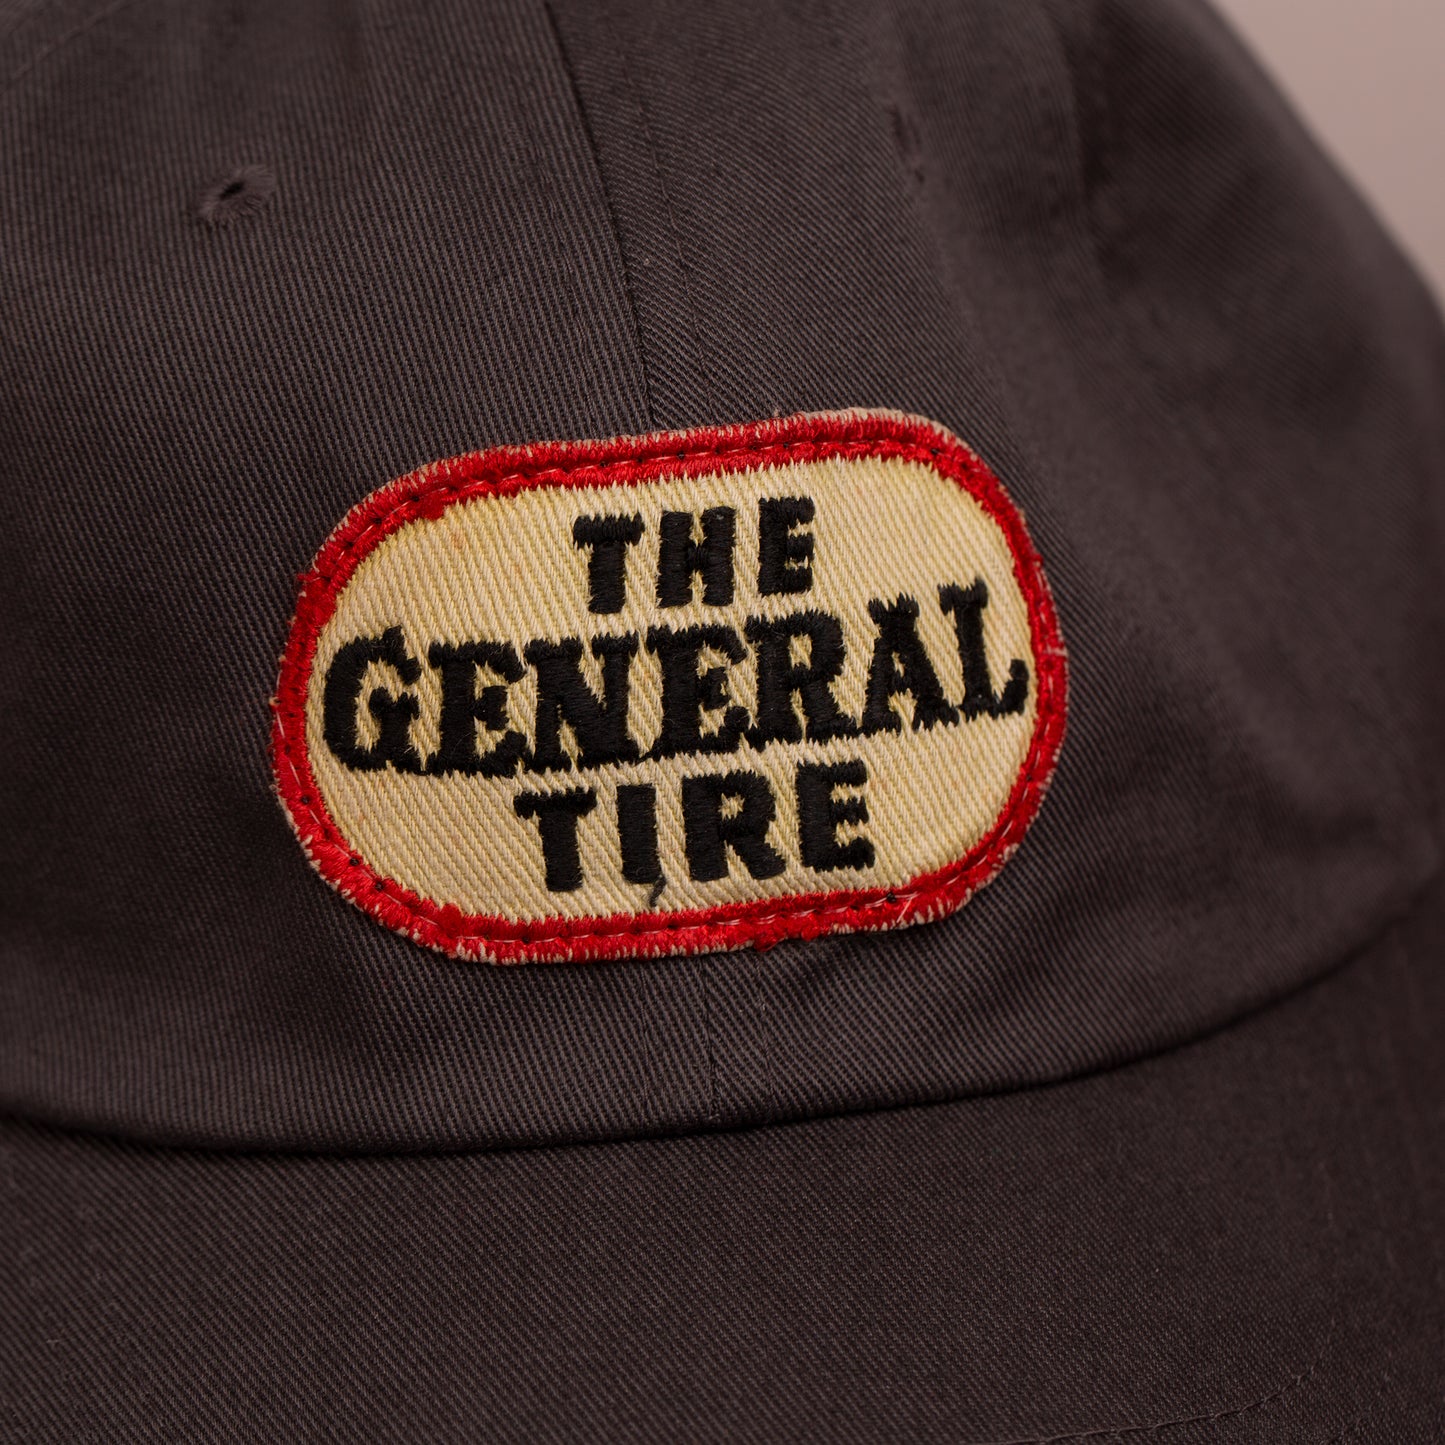 The General Tire